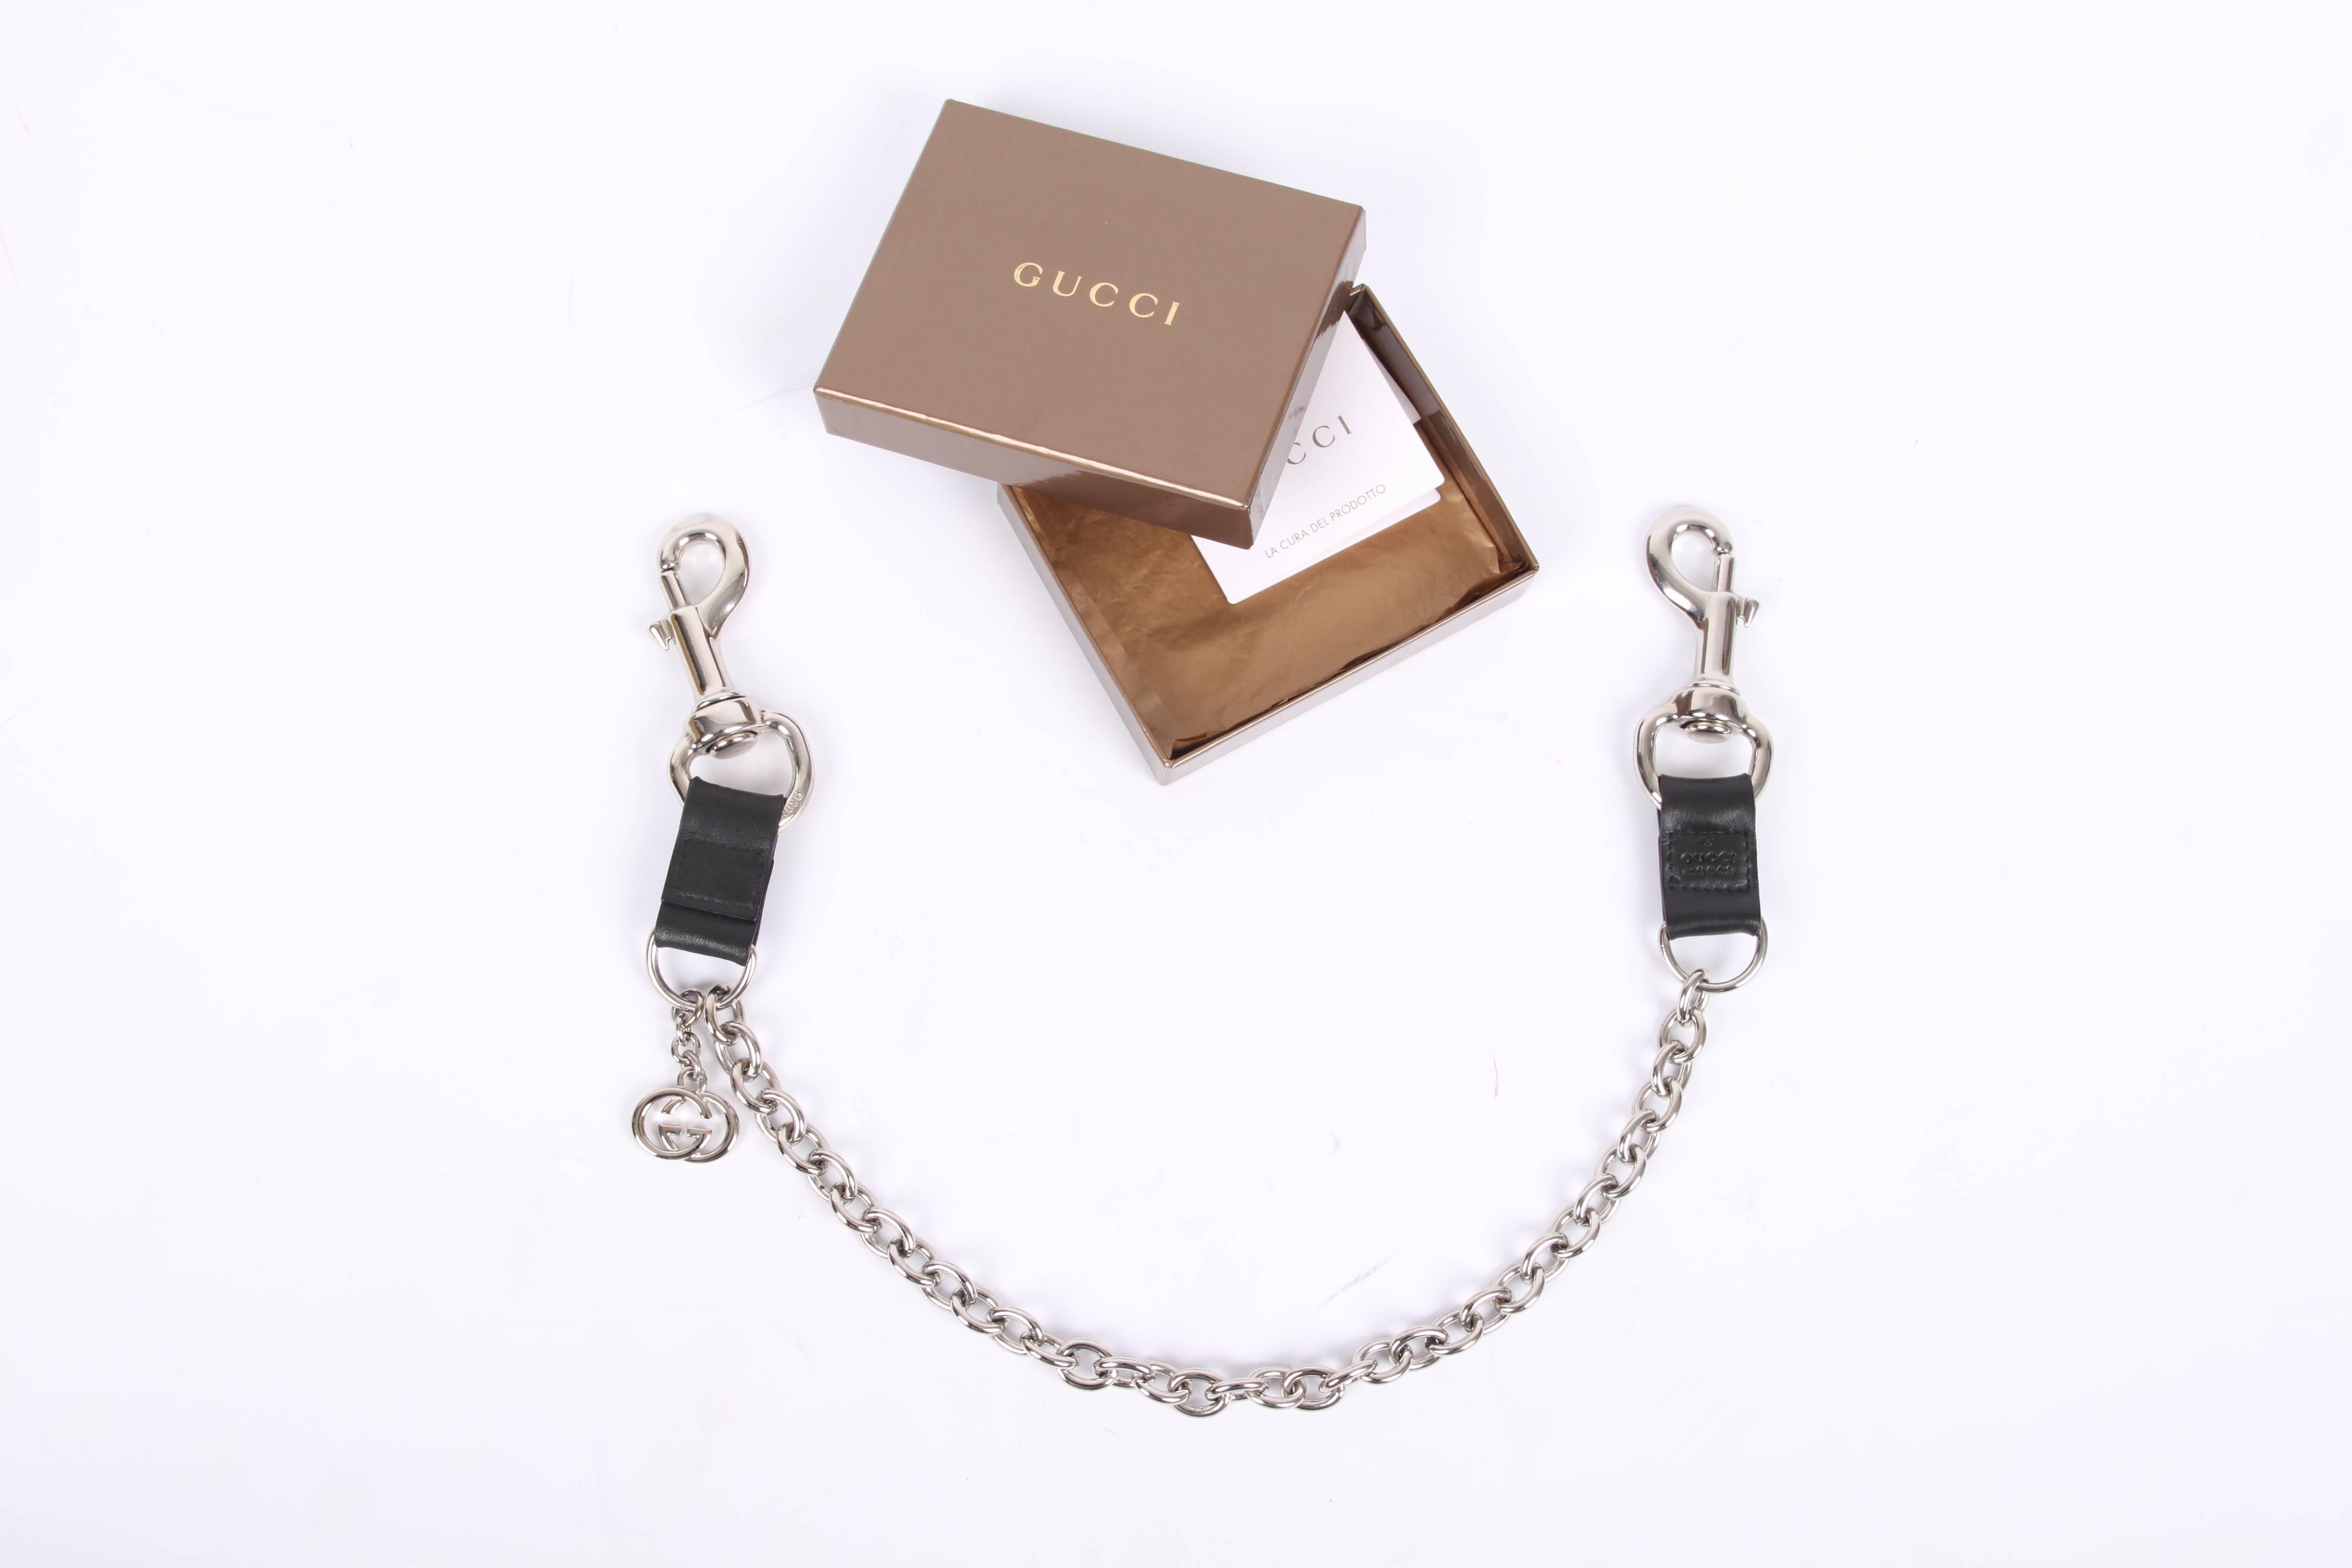 To be used on every Gucci bag! A loose shoulder strap with a beautiful silver-tone GG dangle.

Use the two hooks to clip it on to your bag, it's easy. It is fun to change your shoulder straps once in a while or maybe your old shoulder strap is worn